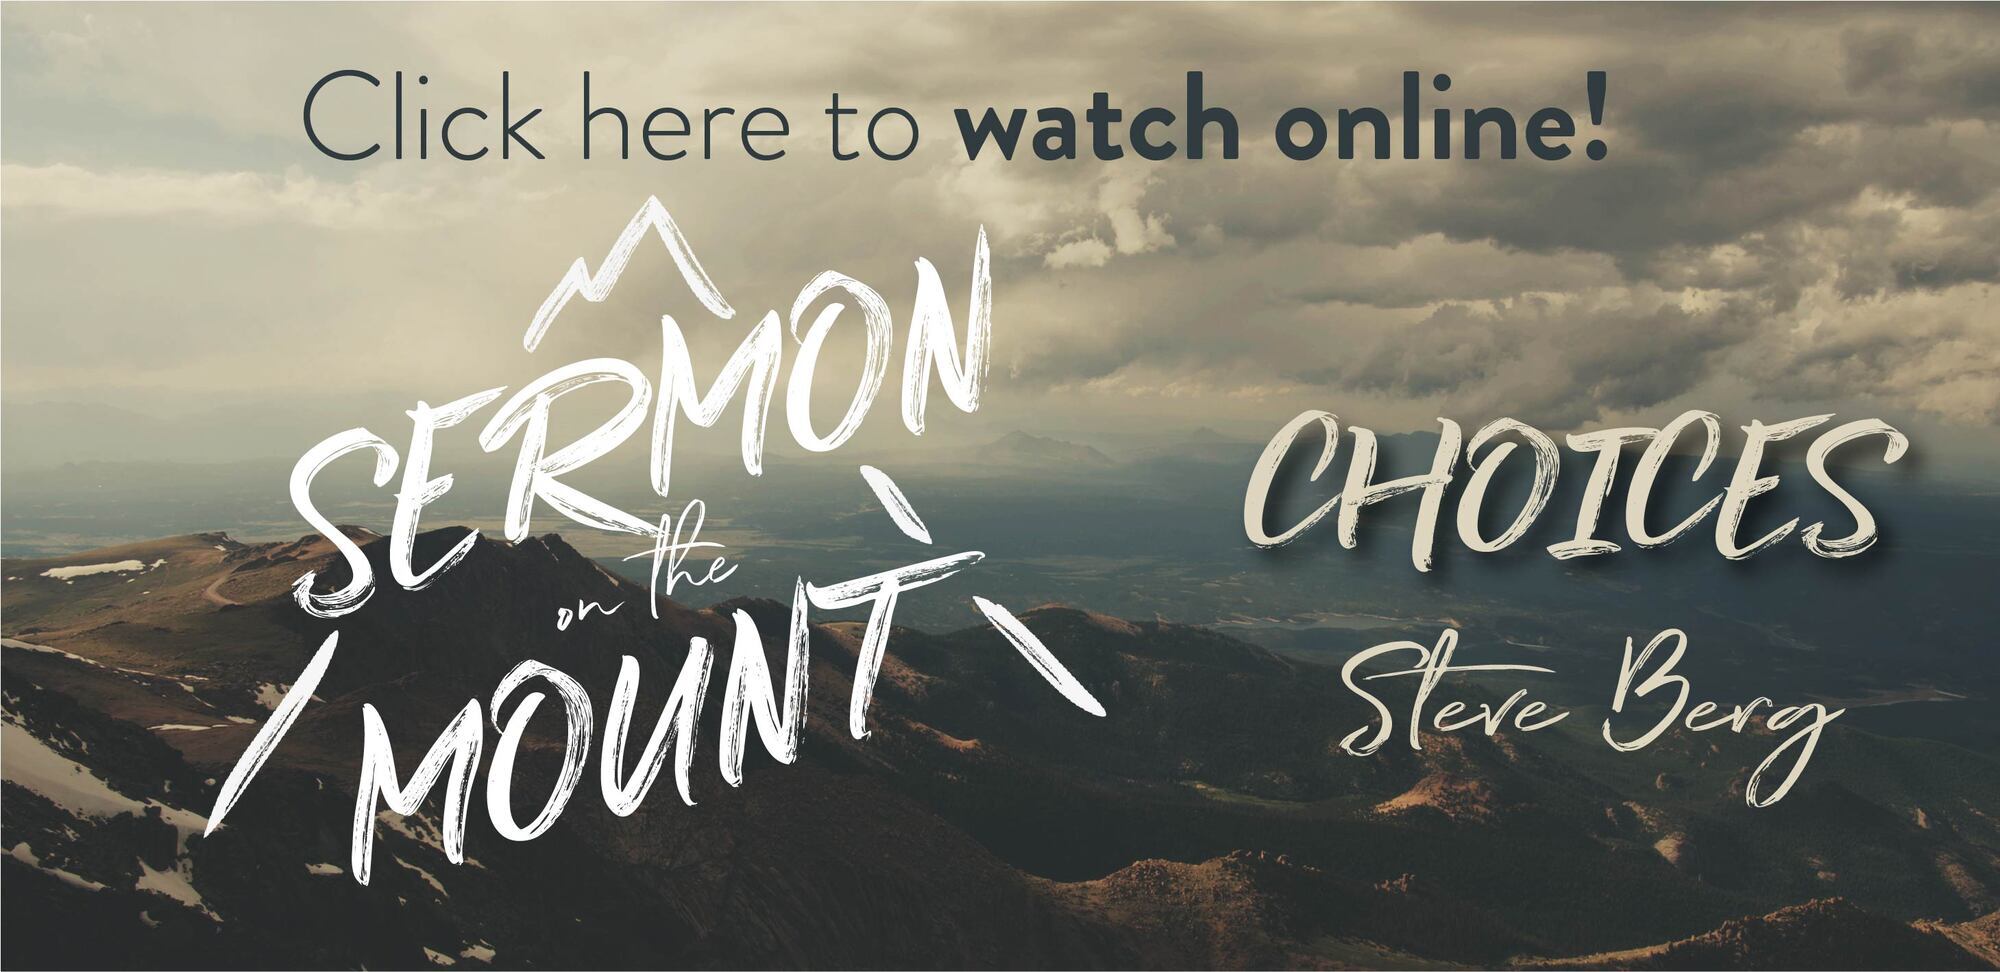 Preview of SERMON ON THE MOUNT: Choices